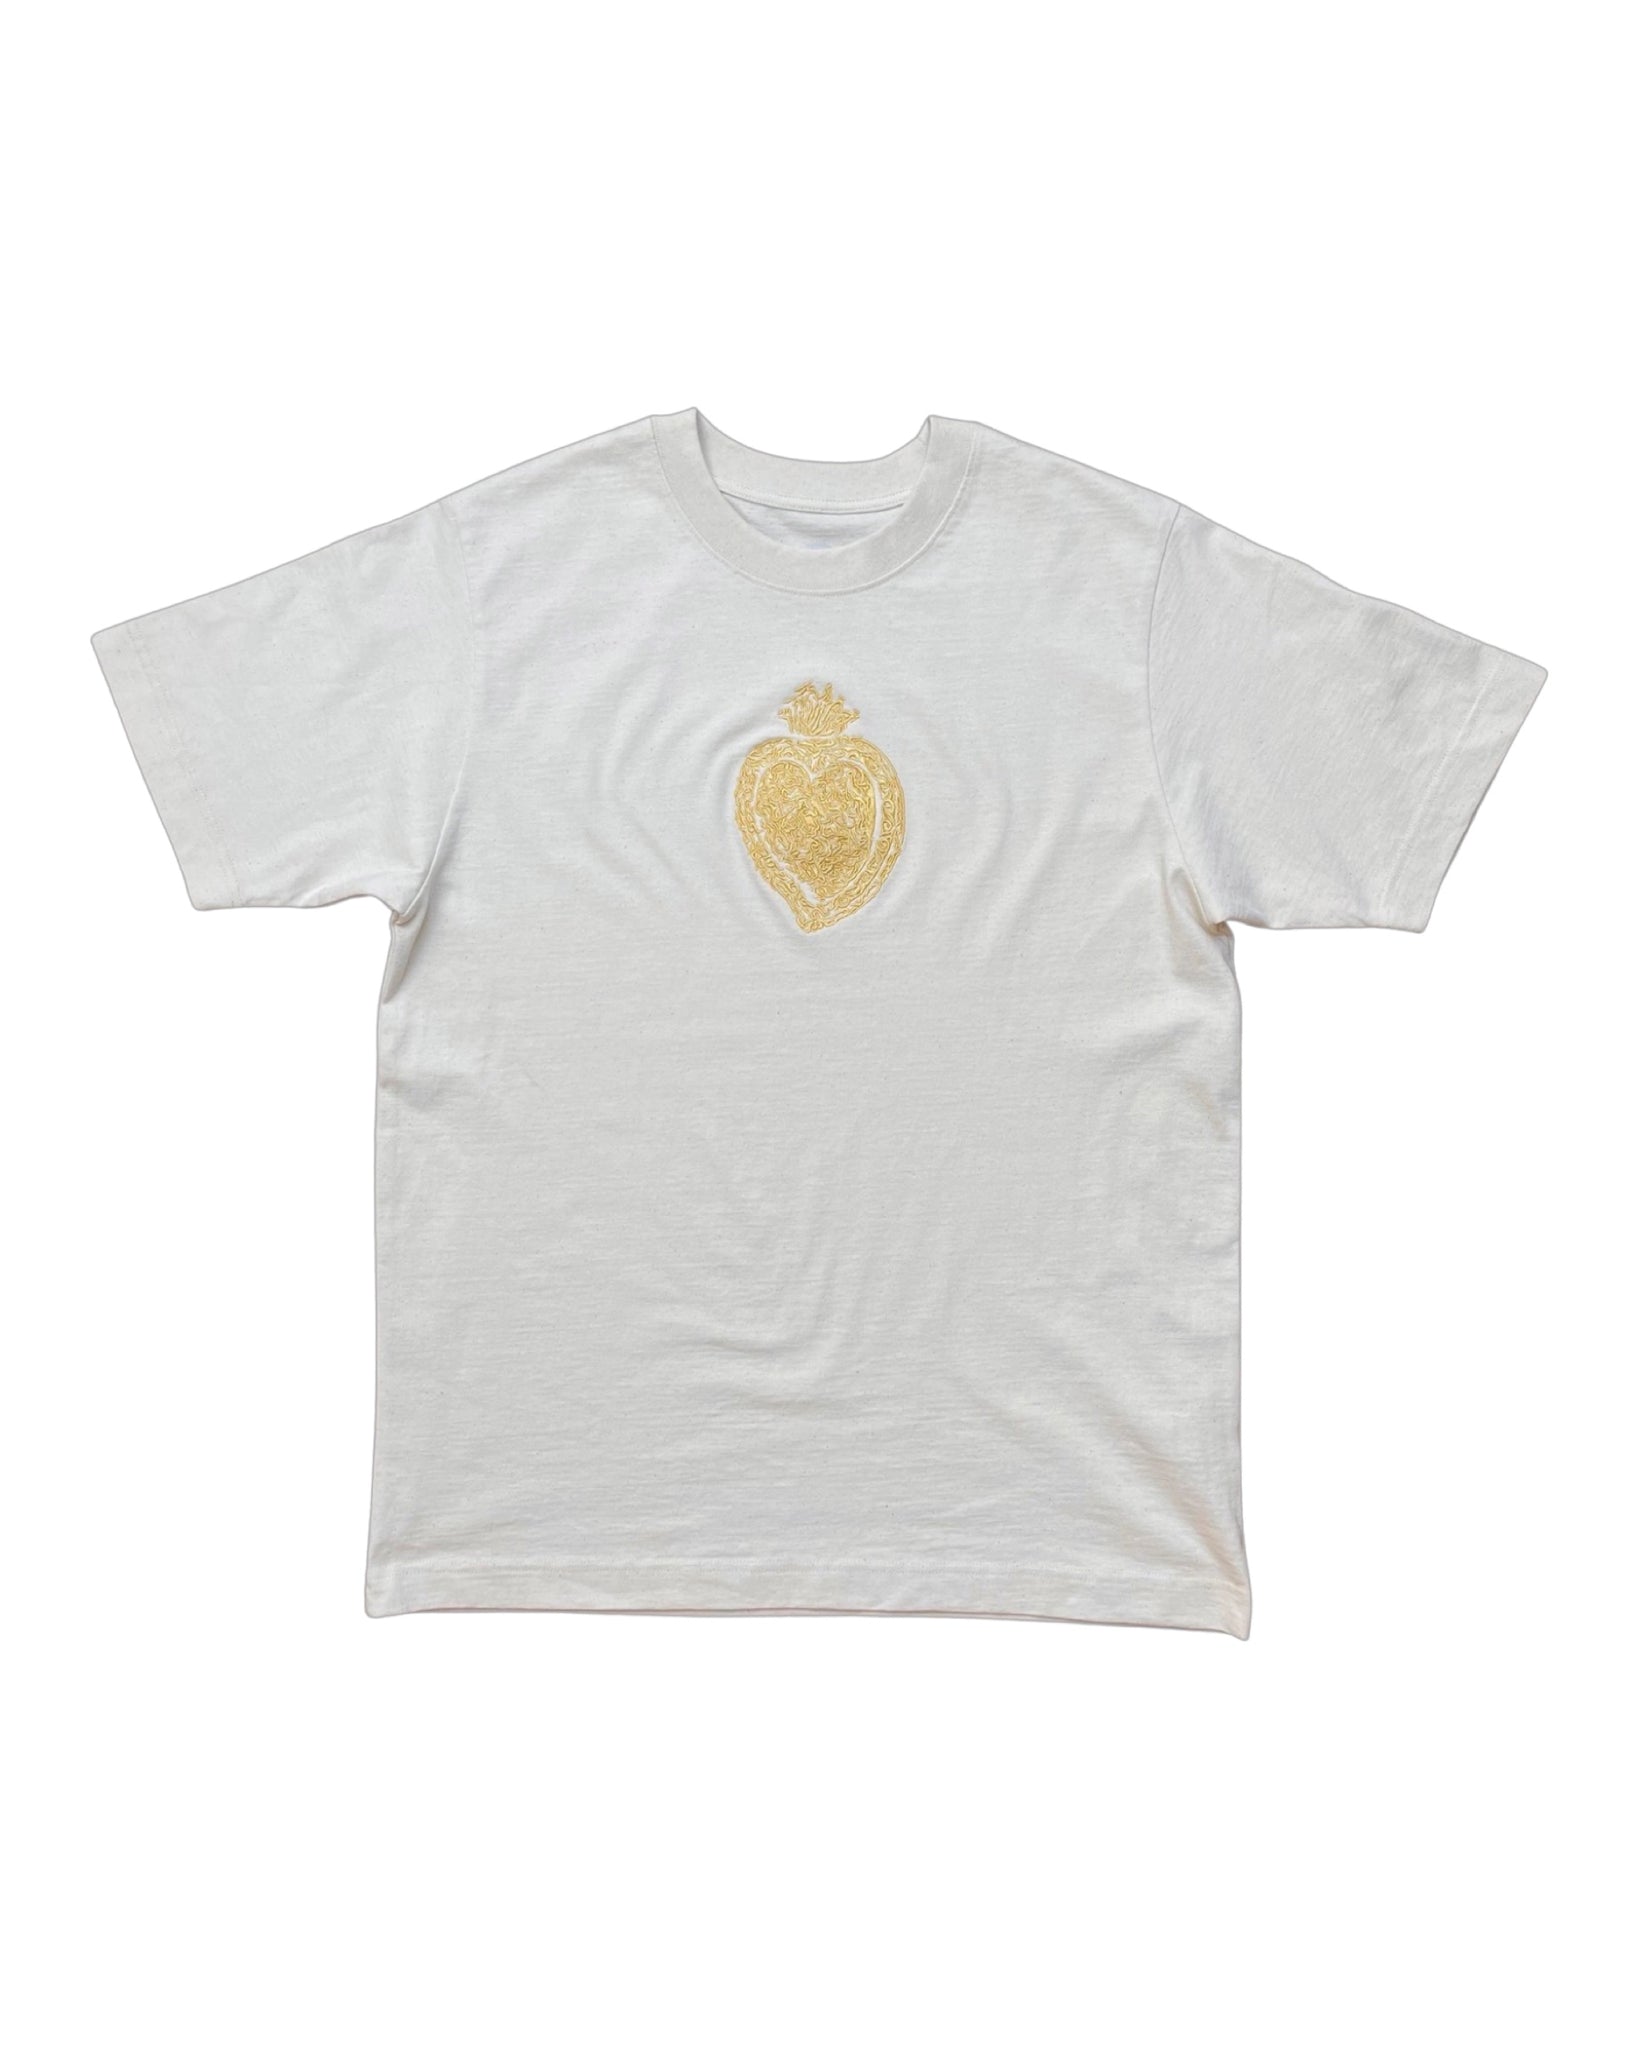 Organic Undyed Cotton T-shirt, Relaxed Fit, Gold Eco-Embroidery